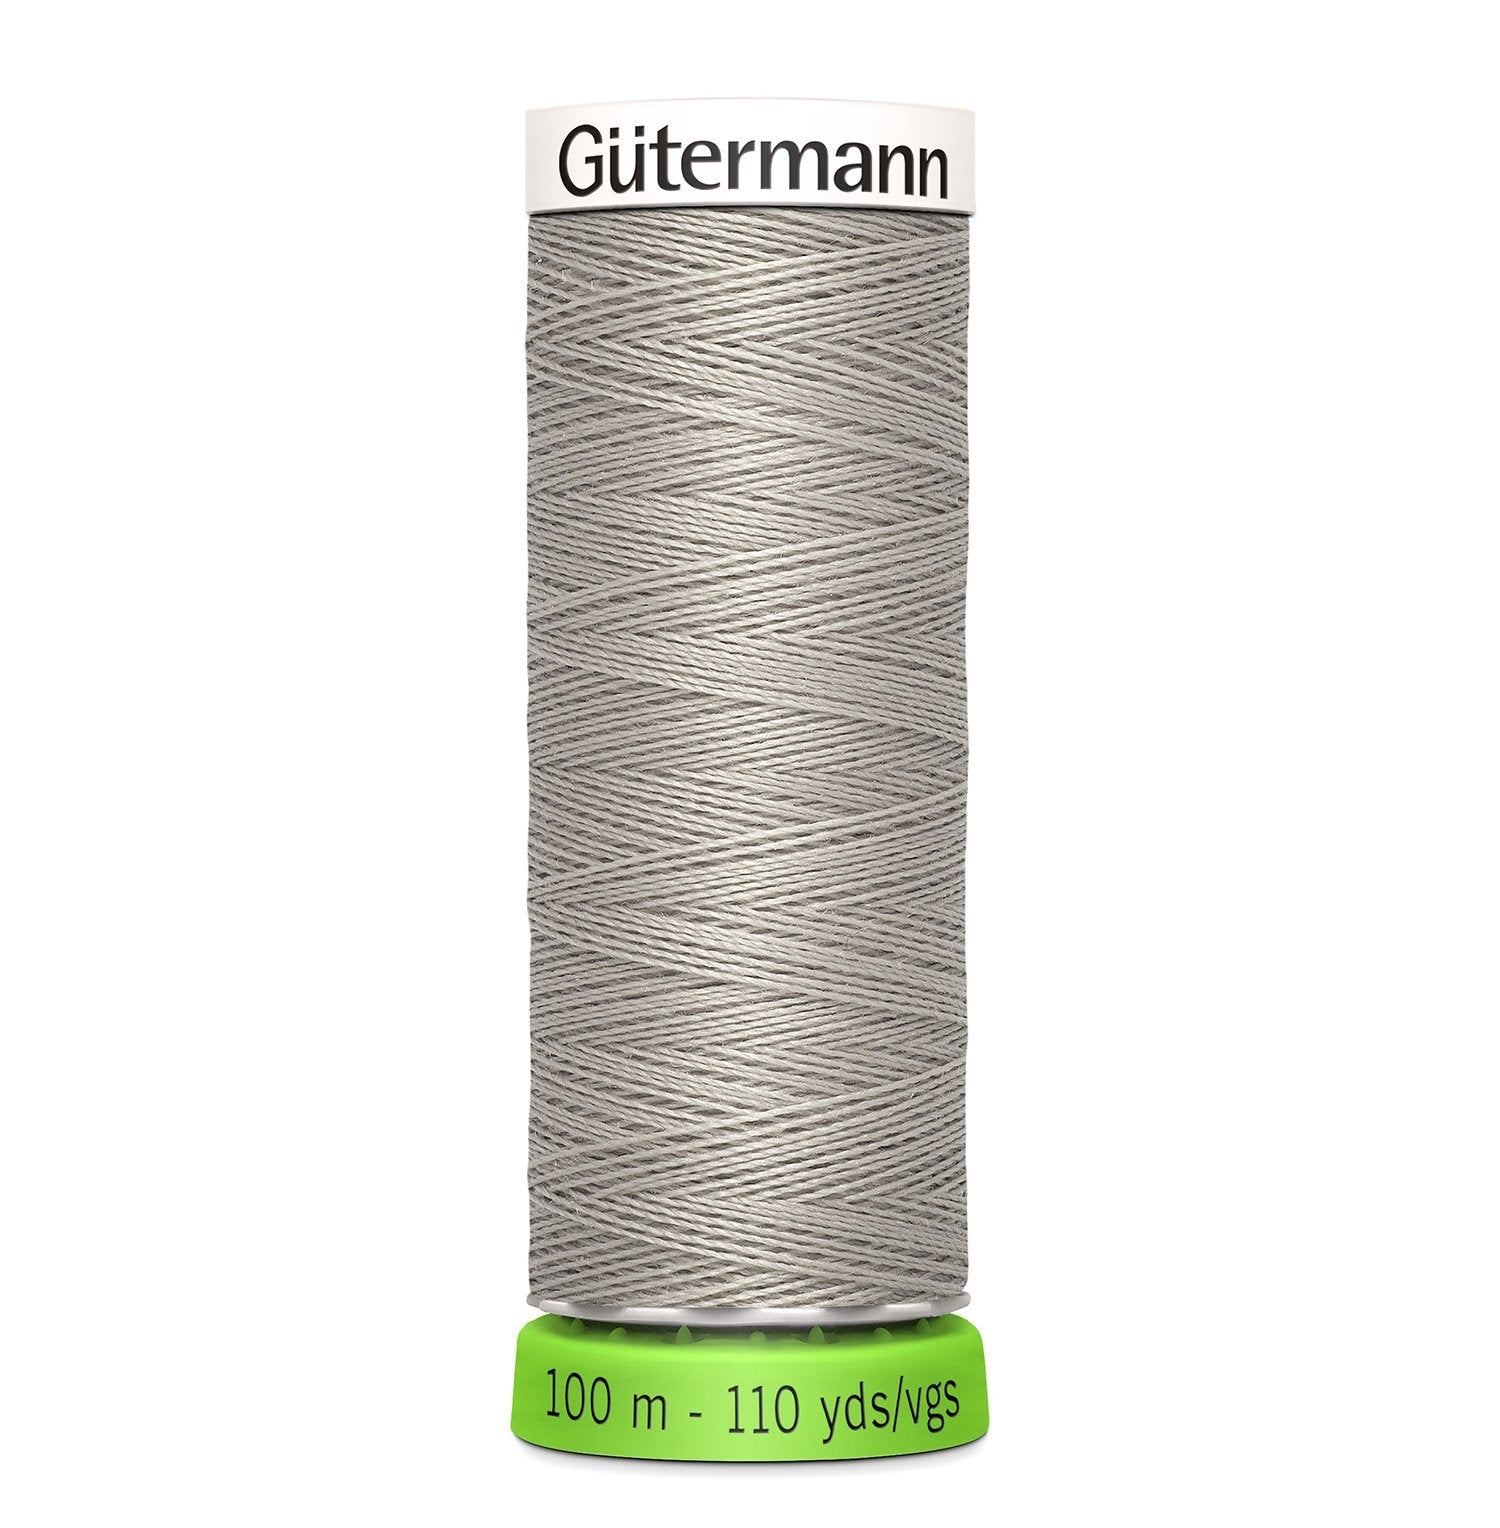 Gutermann Recycled Thread 100m, Colour 118 from Jaycotts Sewing Supplies